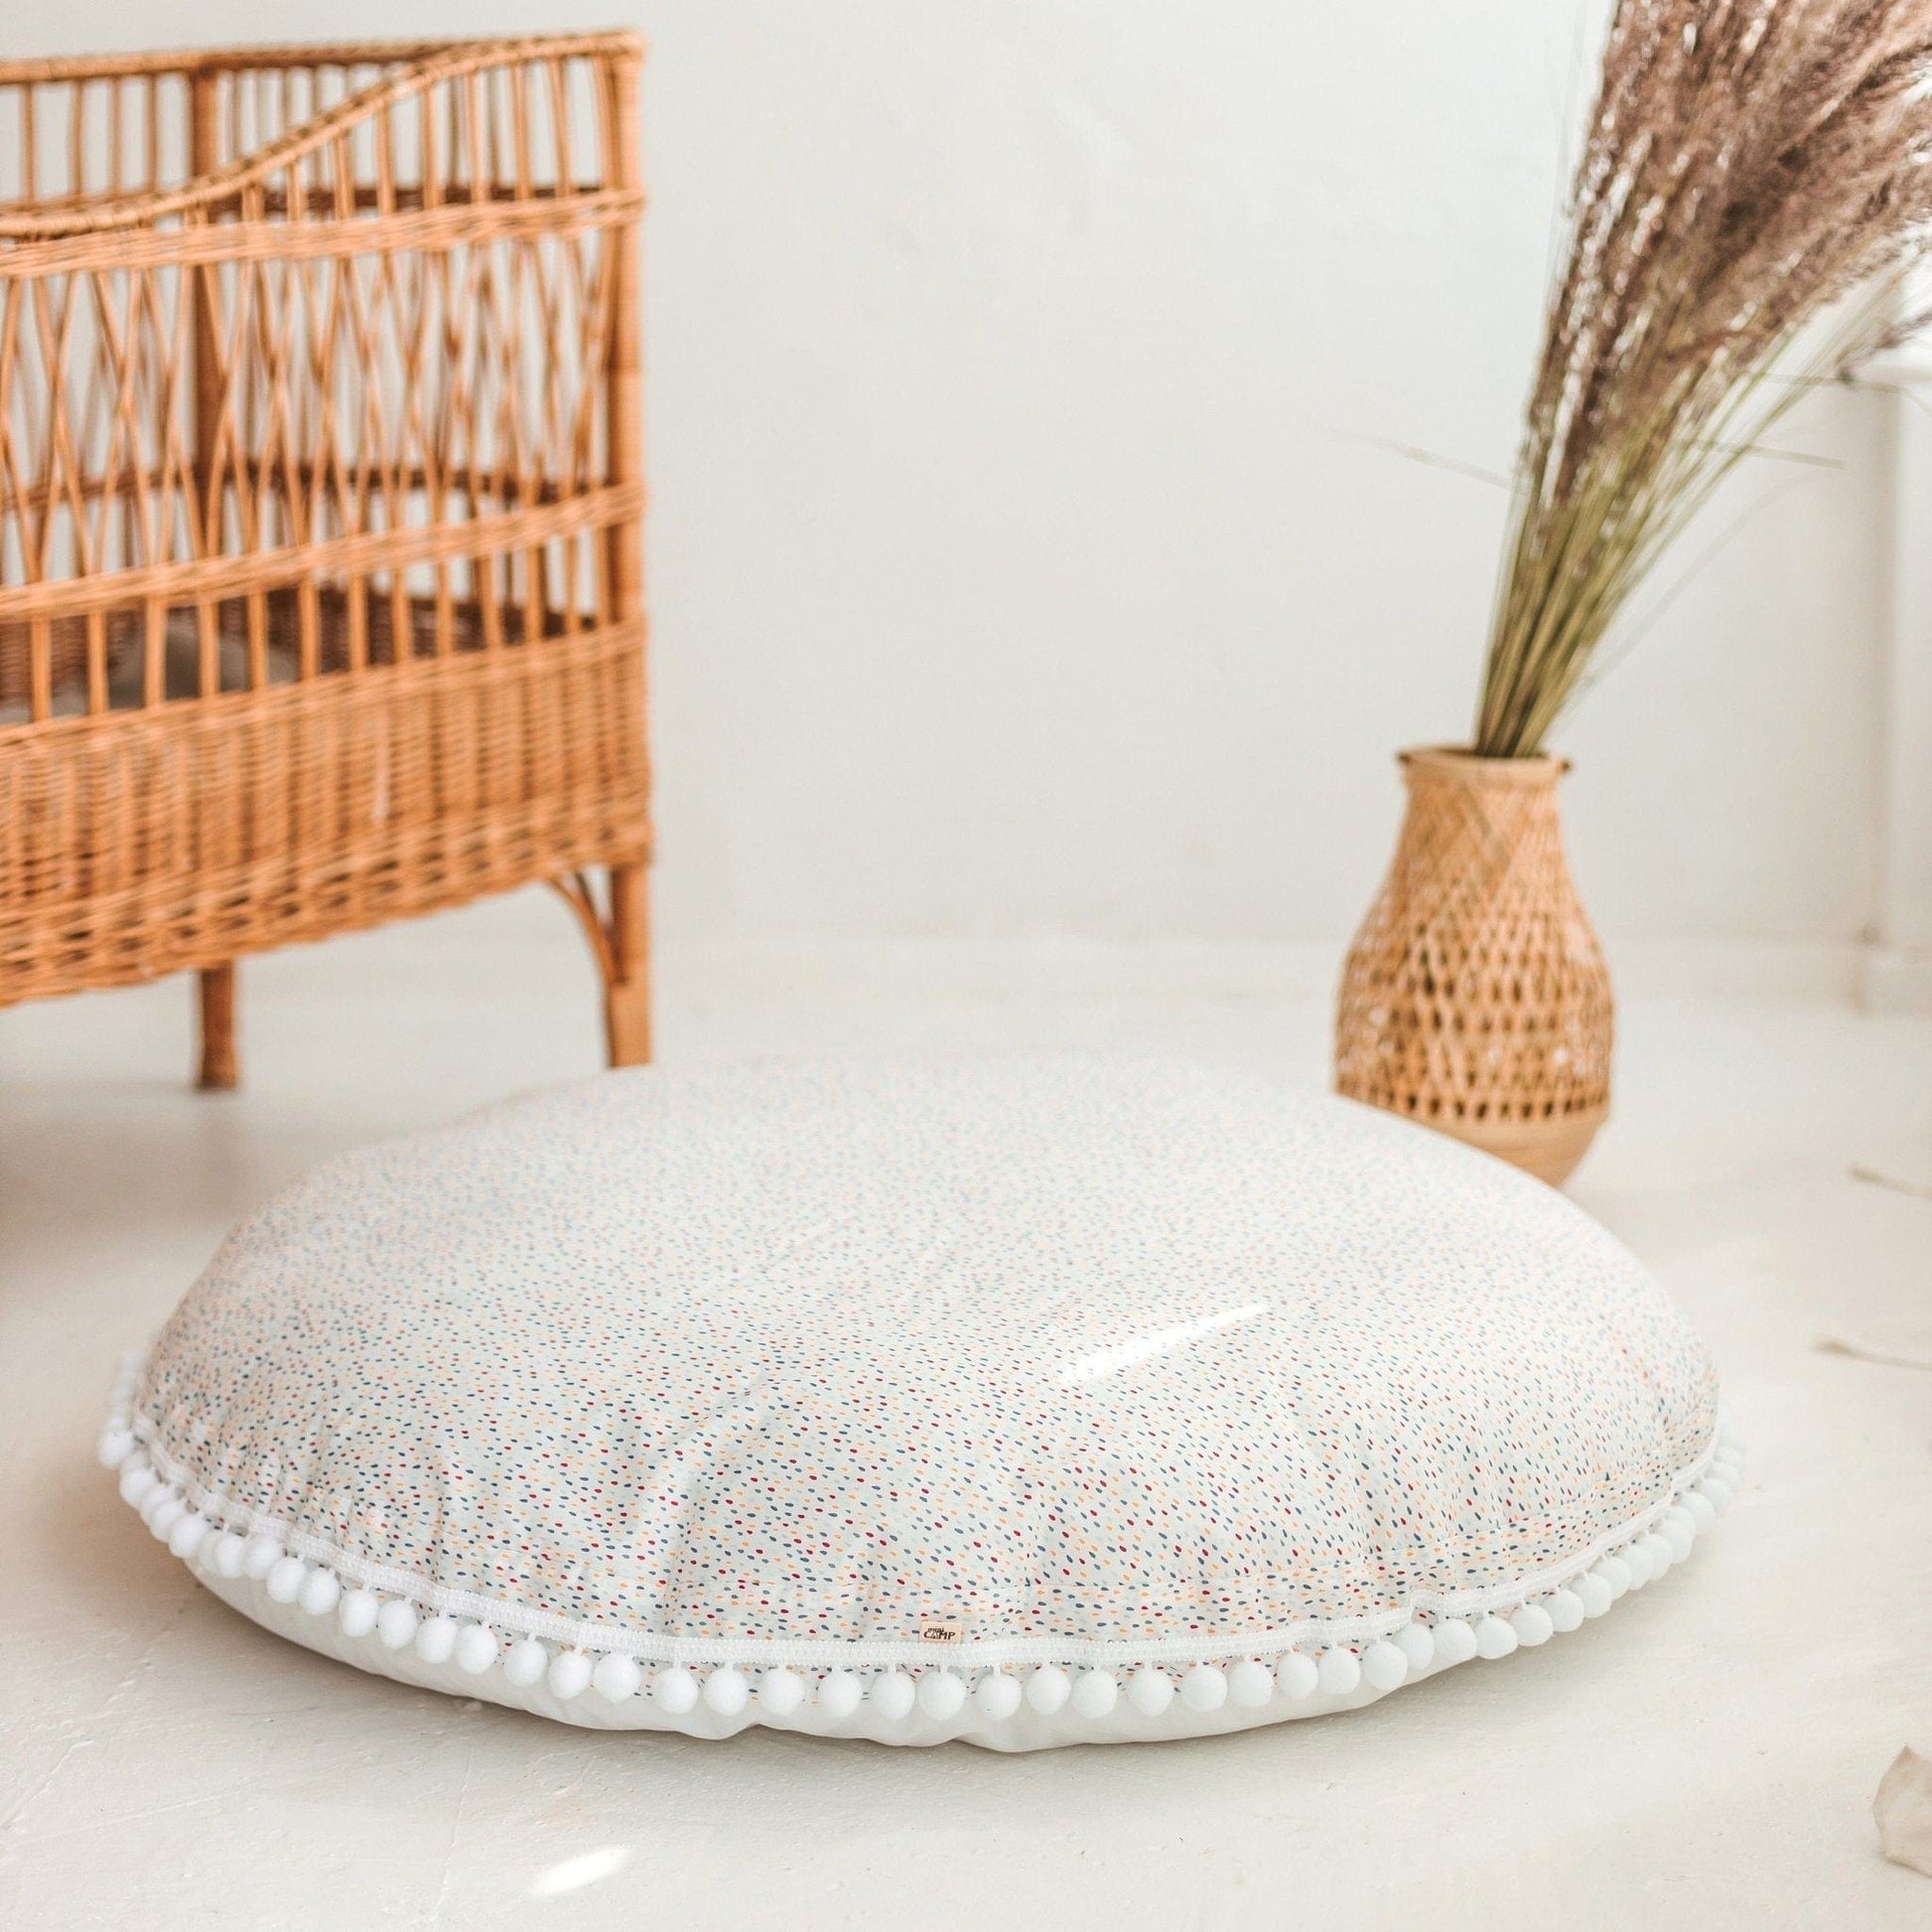 close up of MINICAMP Big Floor Cushion With Pompoms in Colour Drops on White